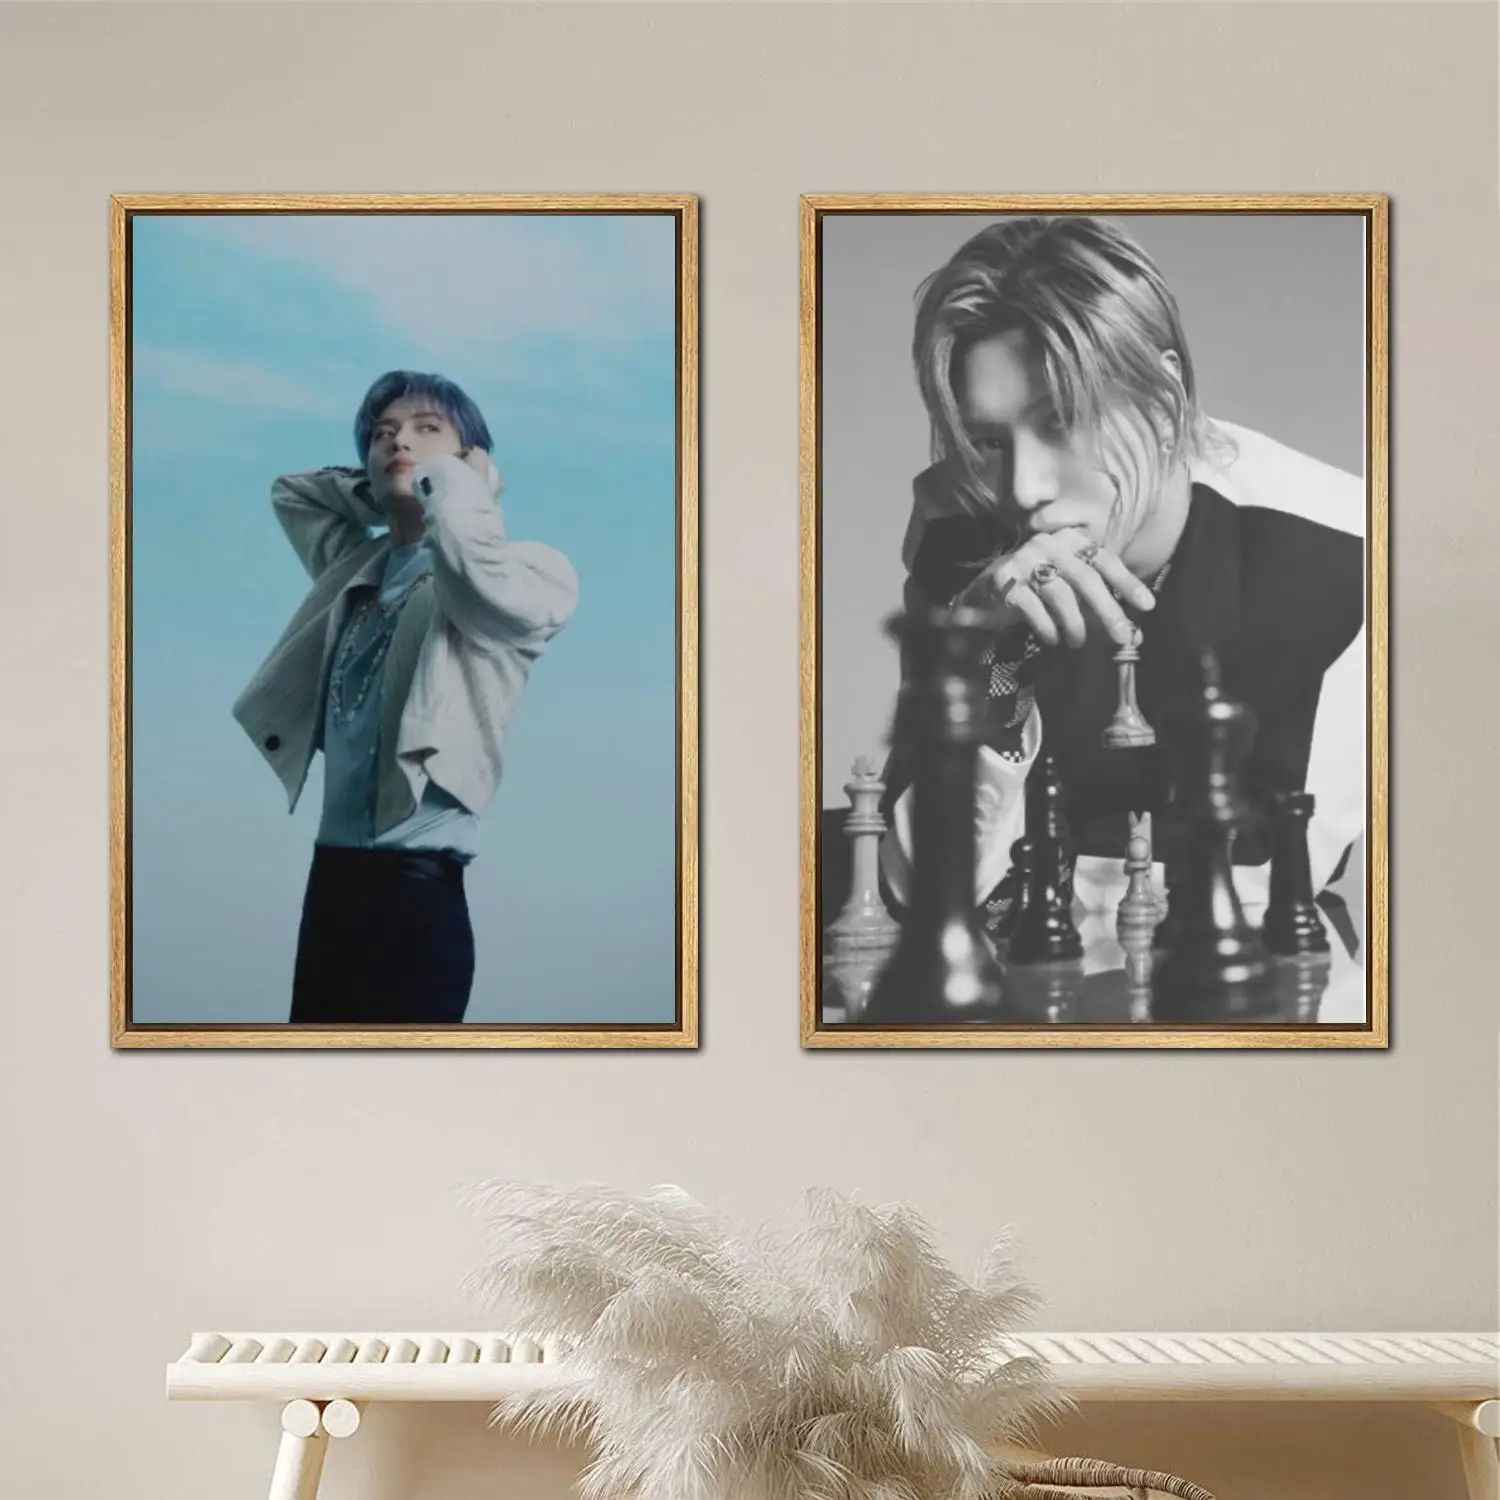 Taemin Poster Painting 24x36 Wall Art Canvas Posters room decor Modern Family bedroom Decoration Art wall decor